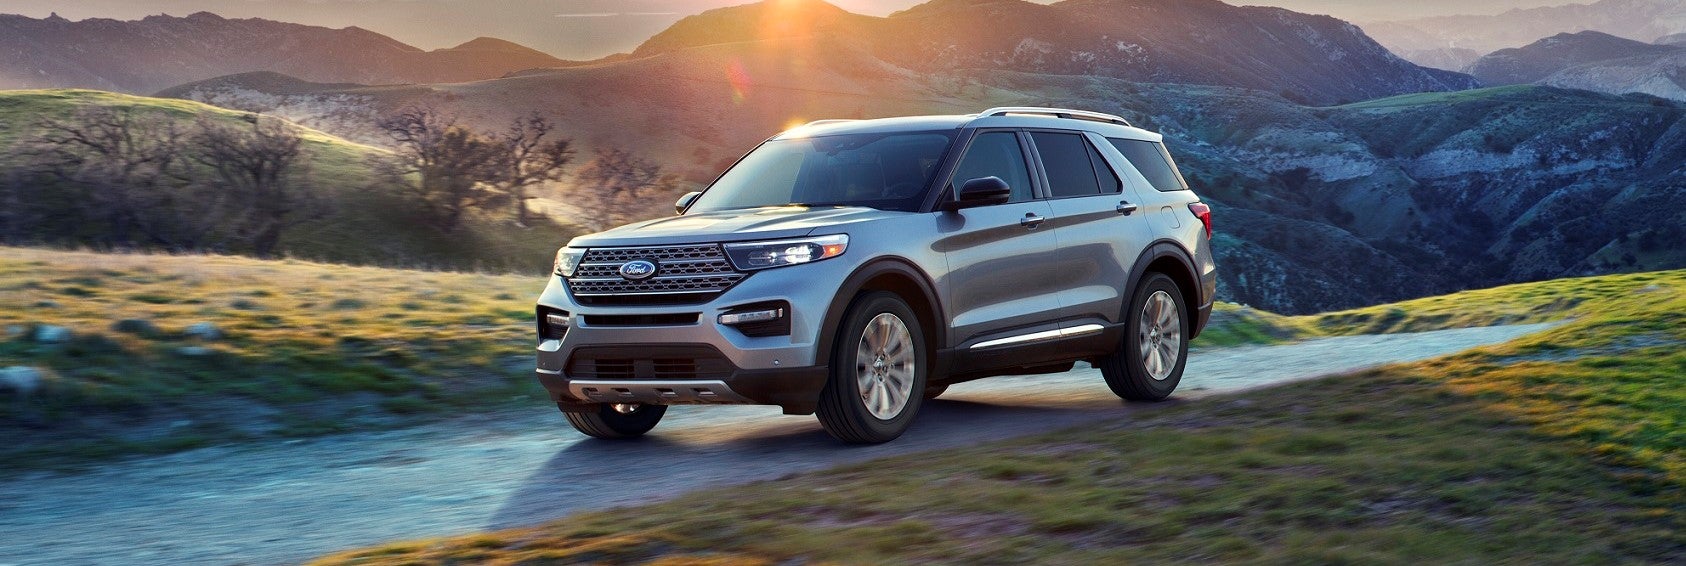 Ford Explorer Towing Capacity Tunkhannock PA 